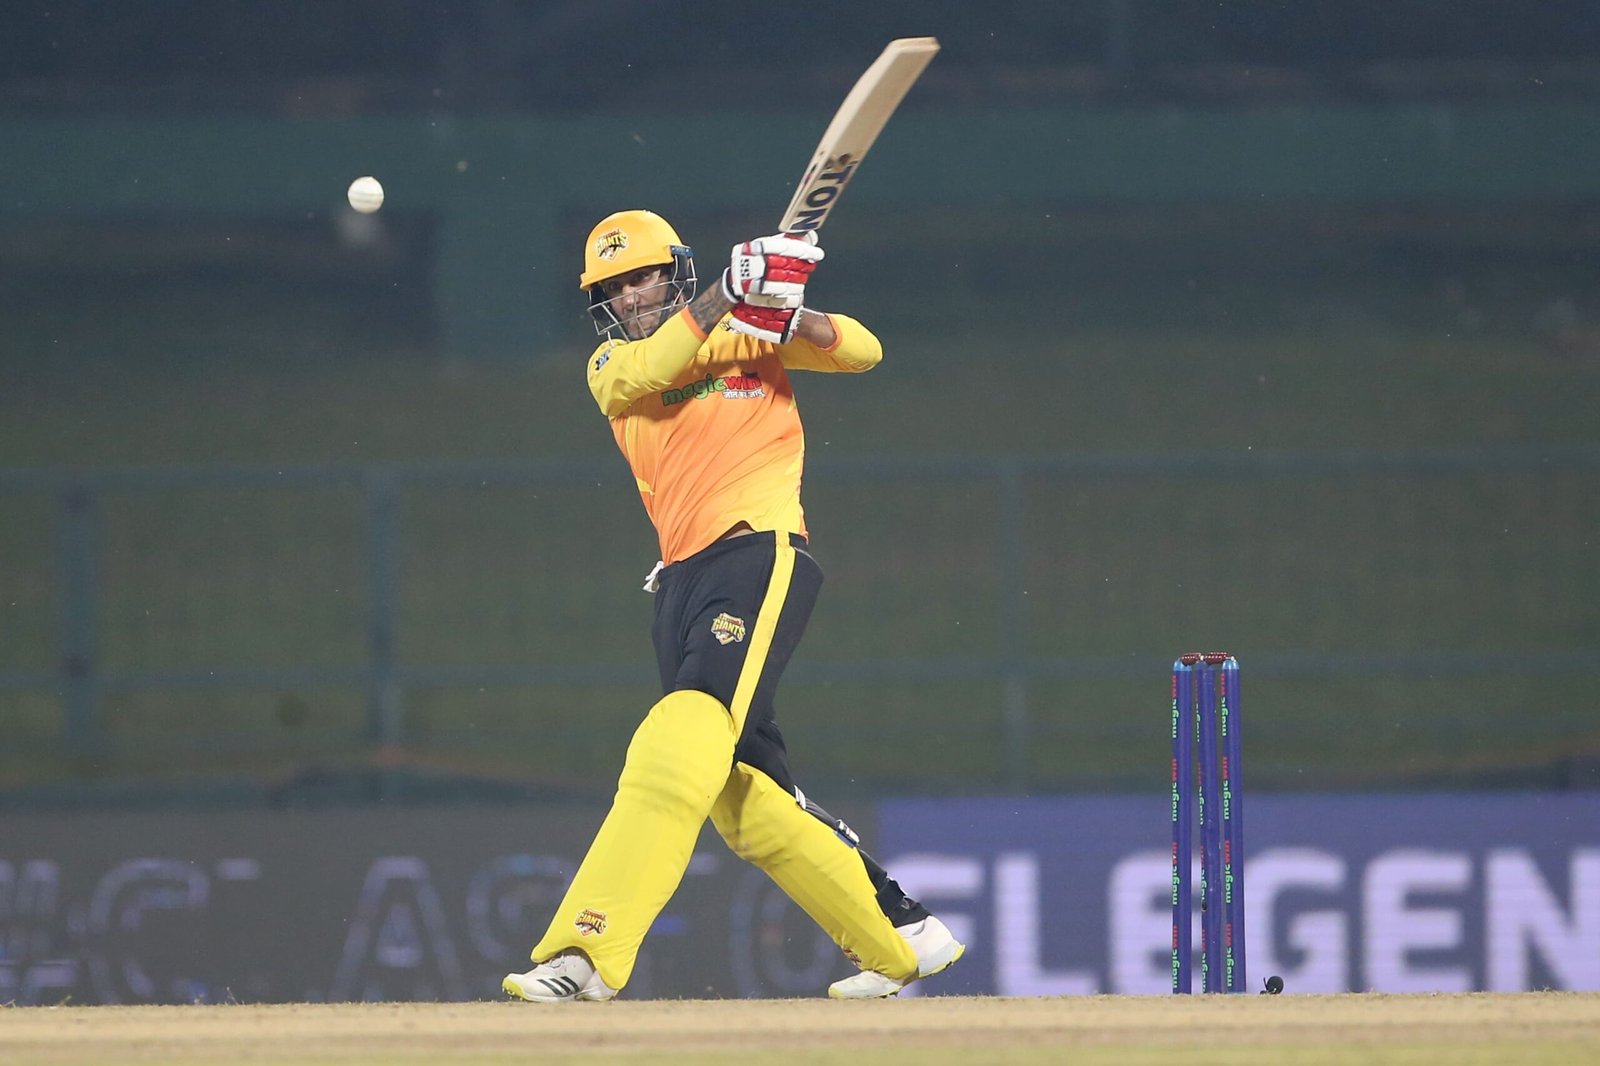 LCT: Rajasthan Kings and Dubai Giants pick up wins